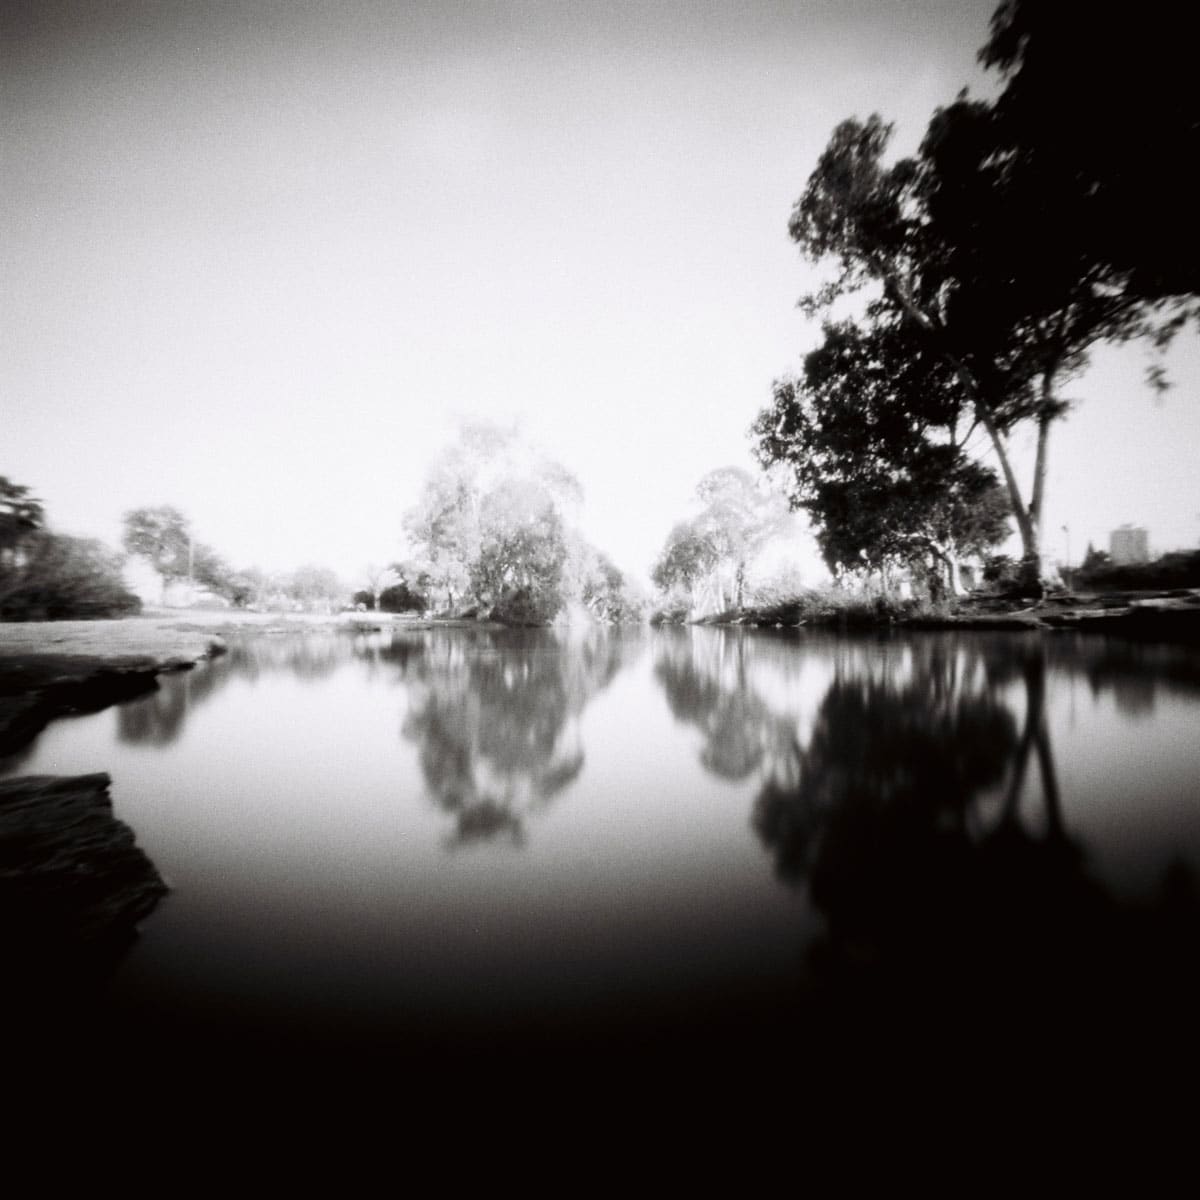 At the River Bank, Rollei Ortho 25, Reality So Subtle 6x6 pinhole.